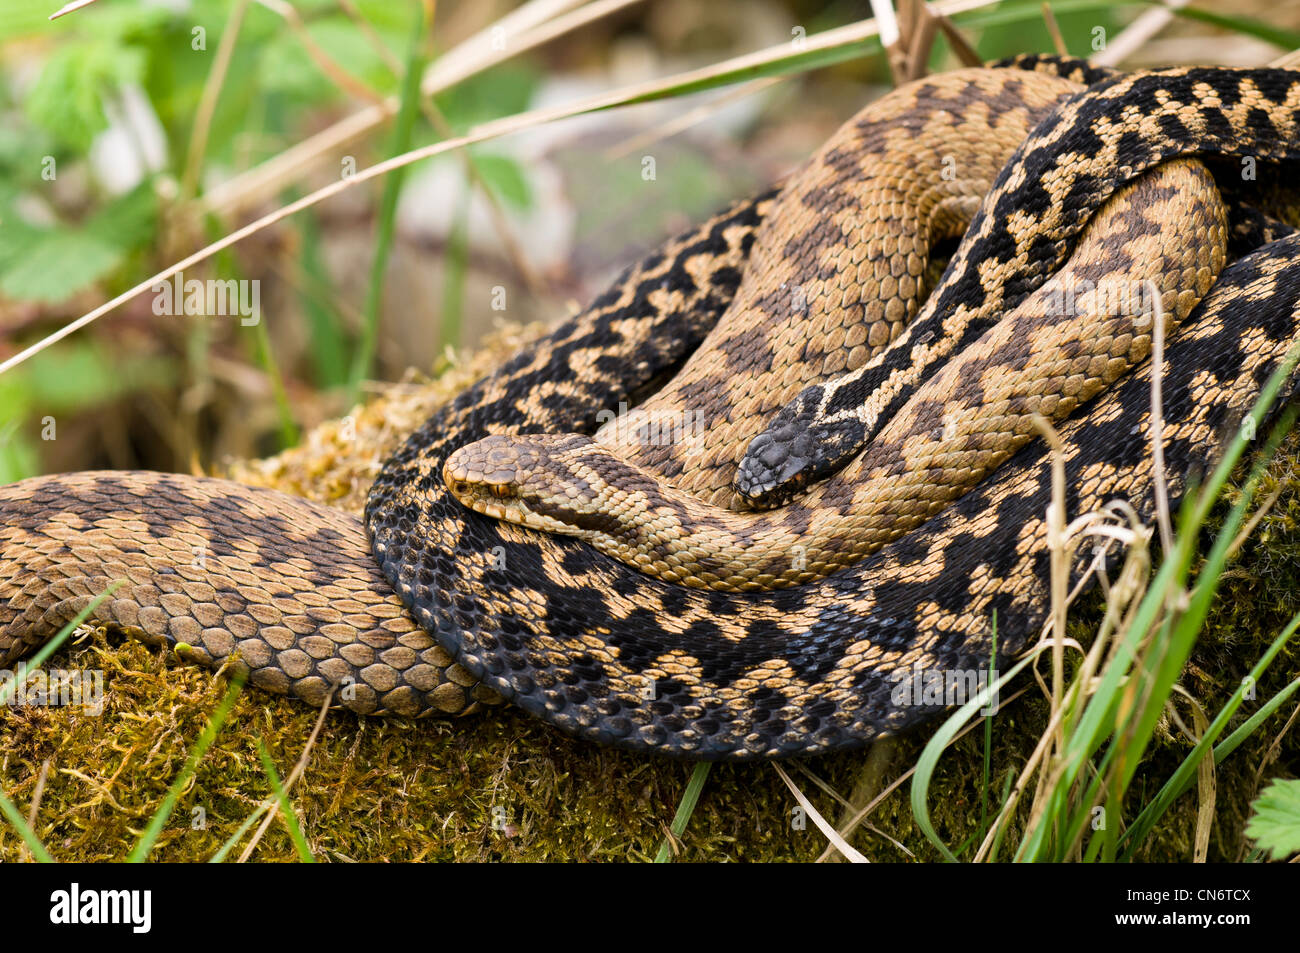 Two adders (Vipera berus) intertwined at the Wildwood Trust, Herne Bay, Kent. April. Captive animals. Stock Photo